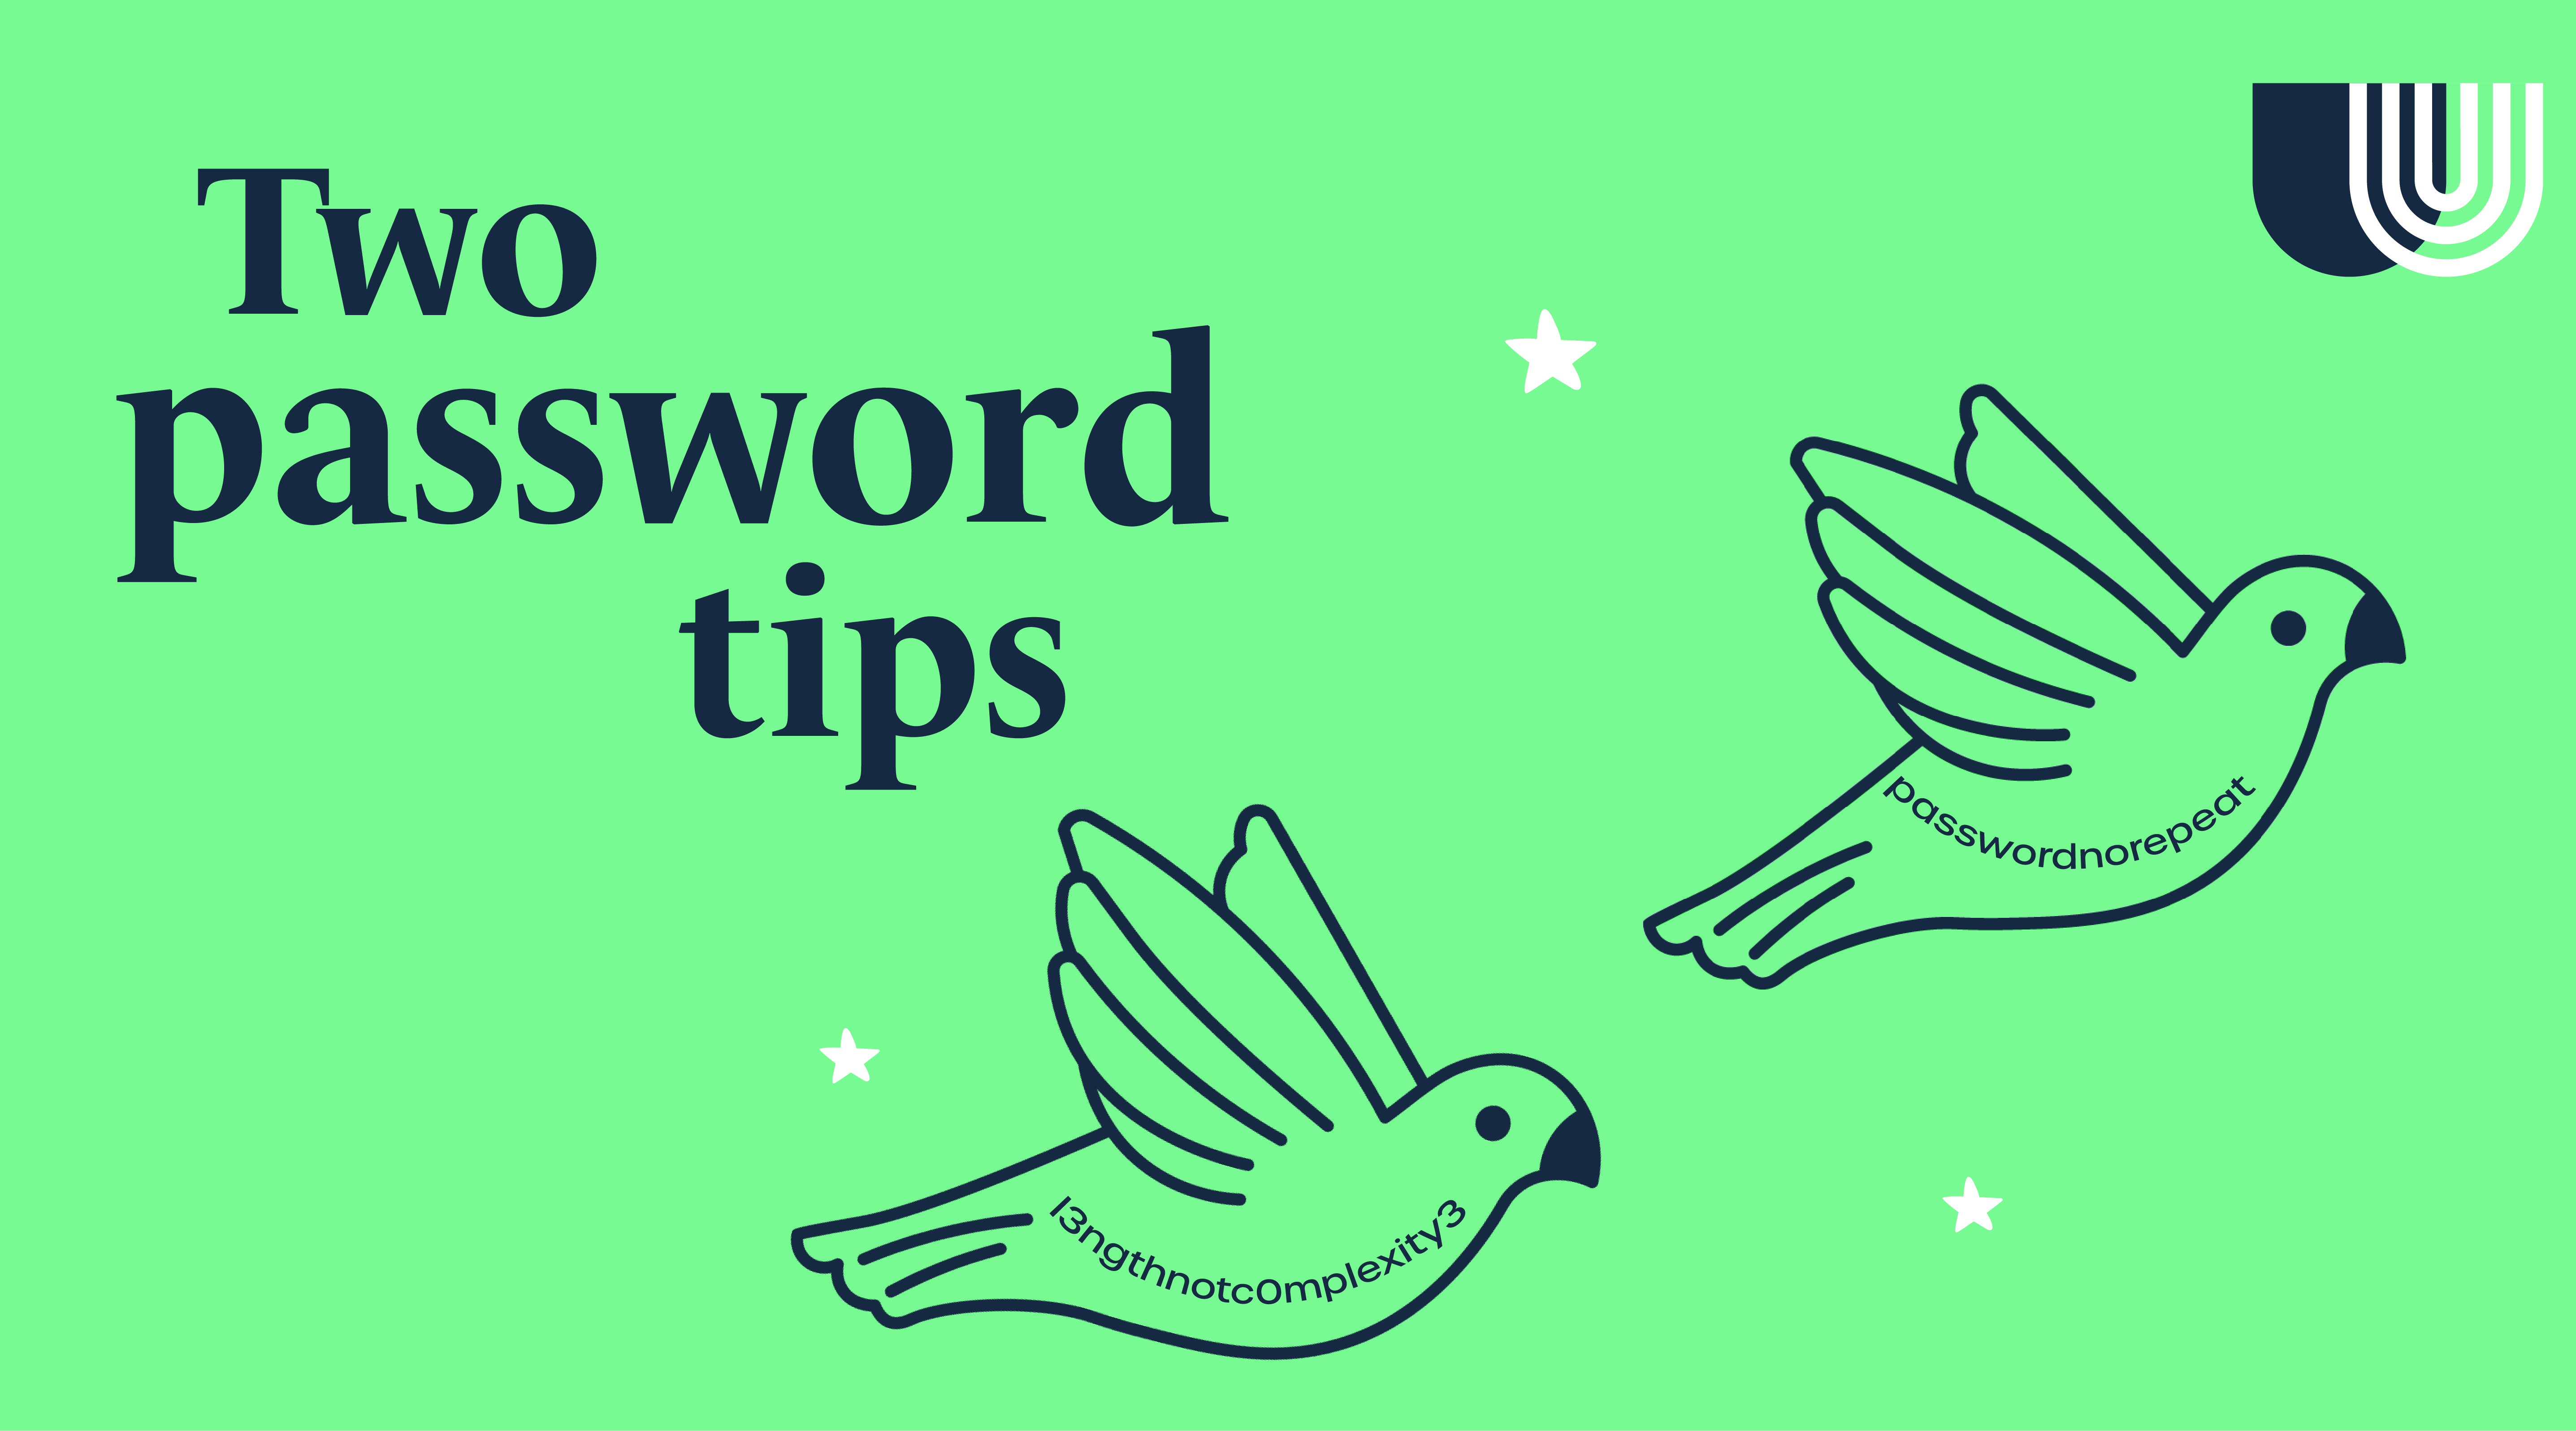 Two password tips